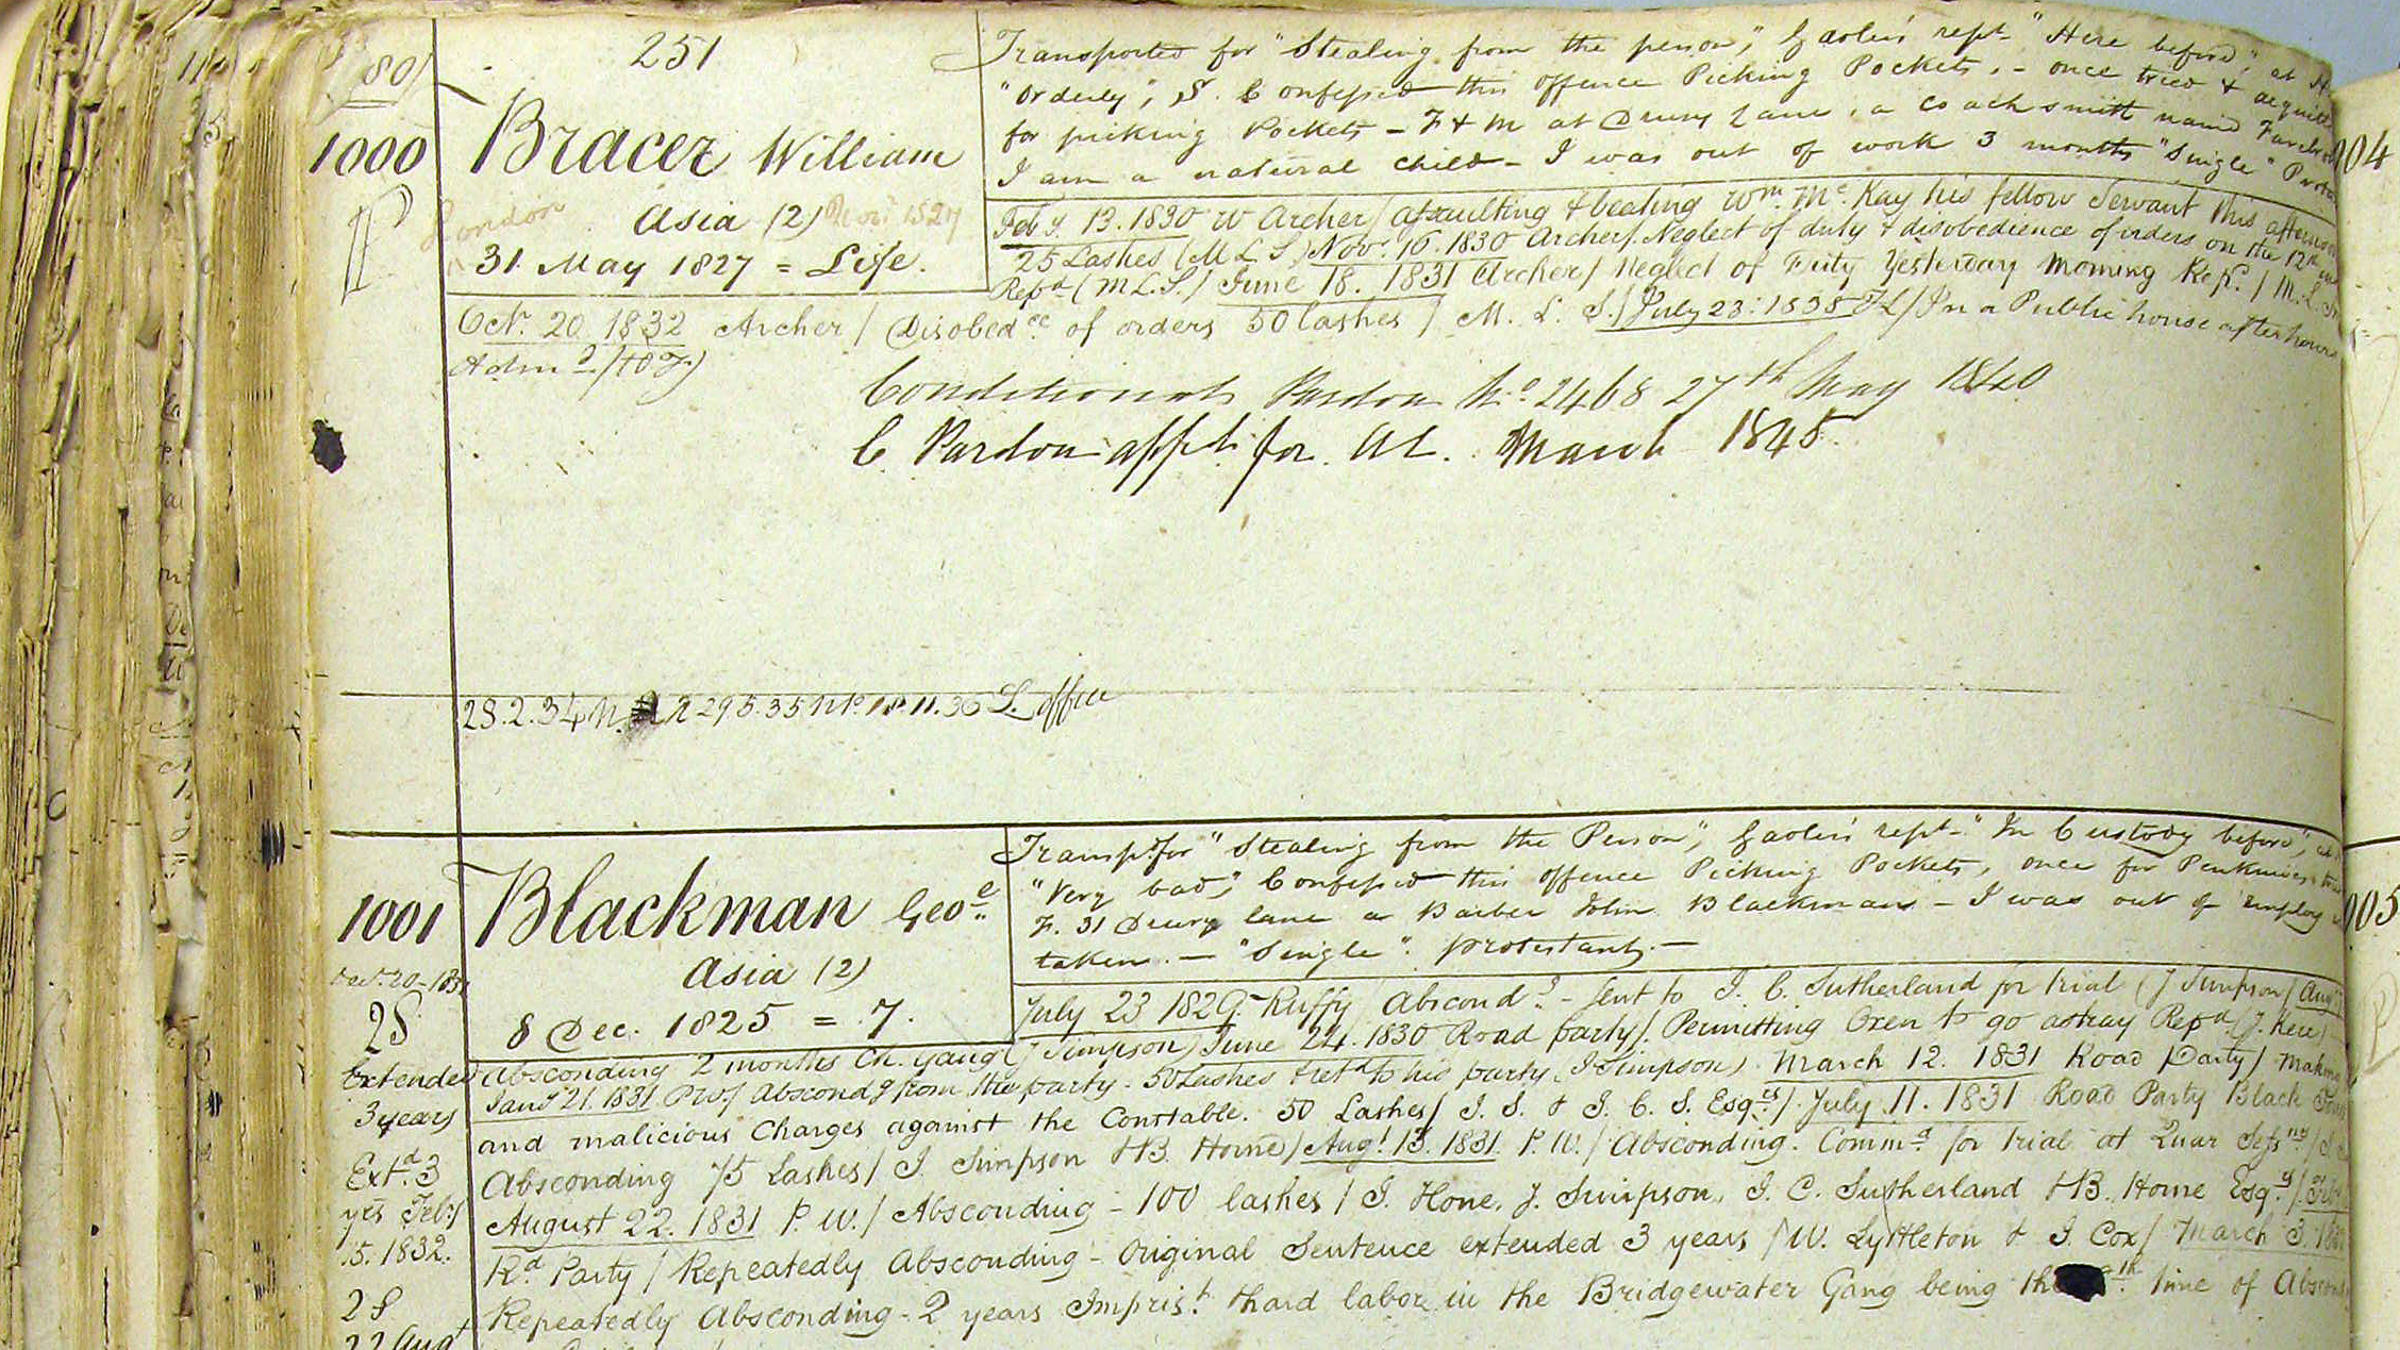 Excerpt from ledgers held as part of Brickendon Estate’s archives mentioning William Bracer.